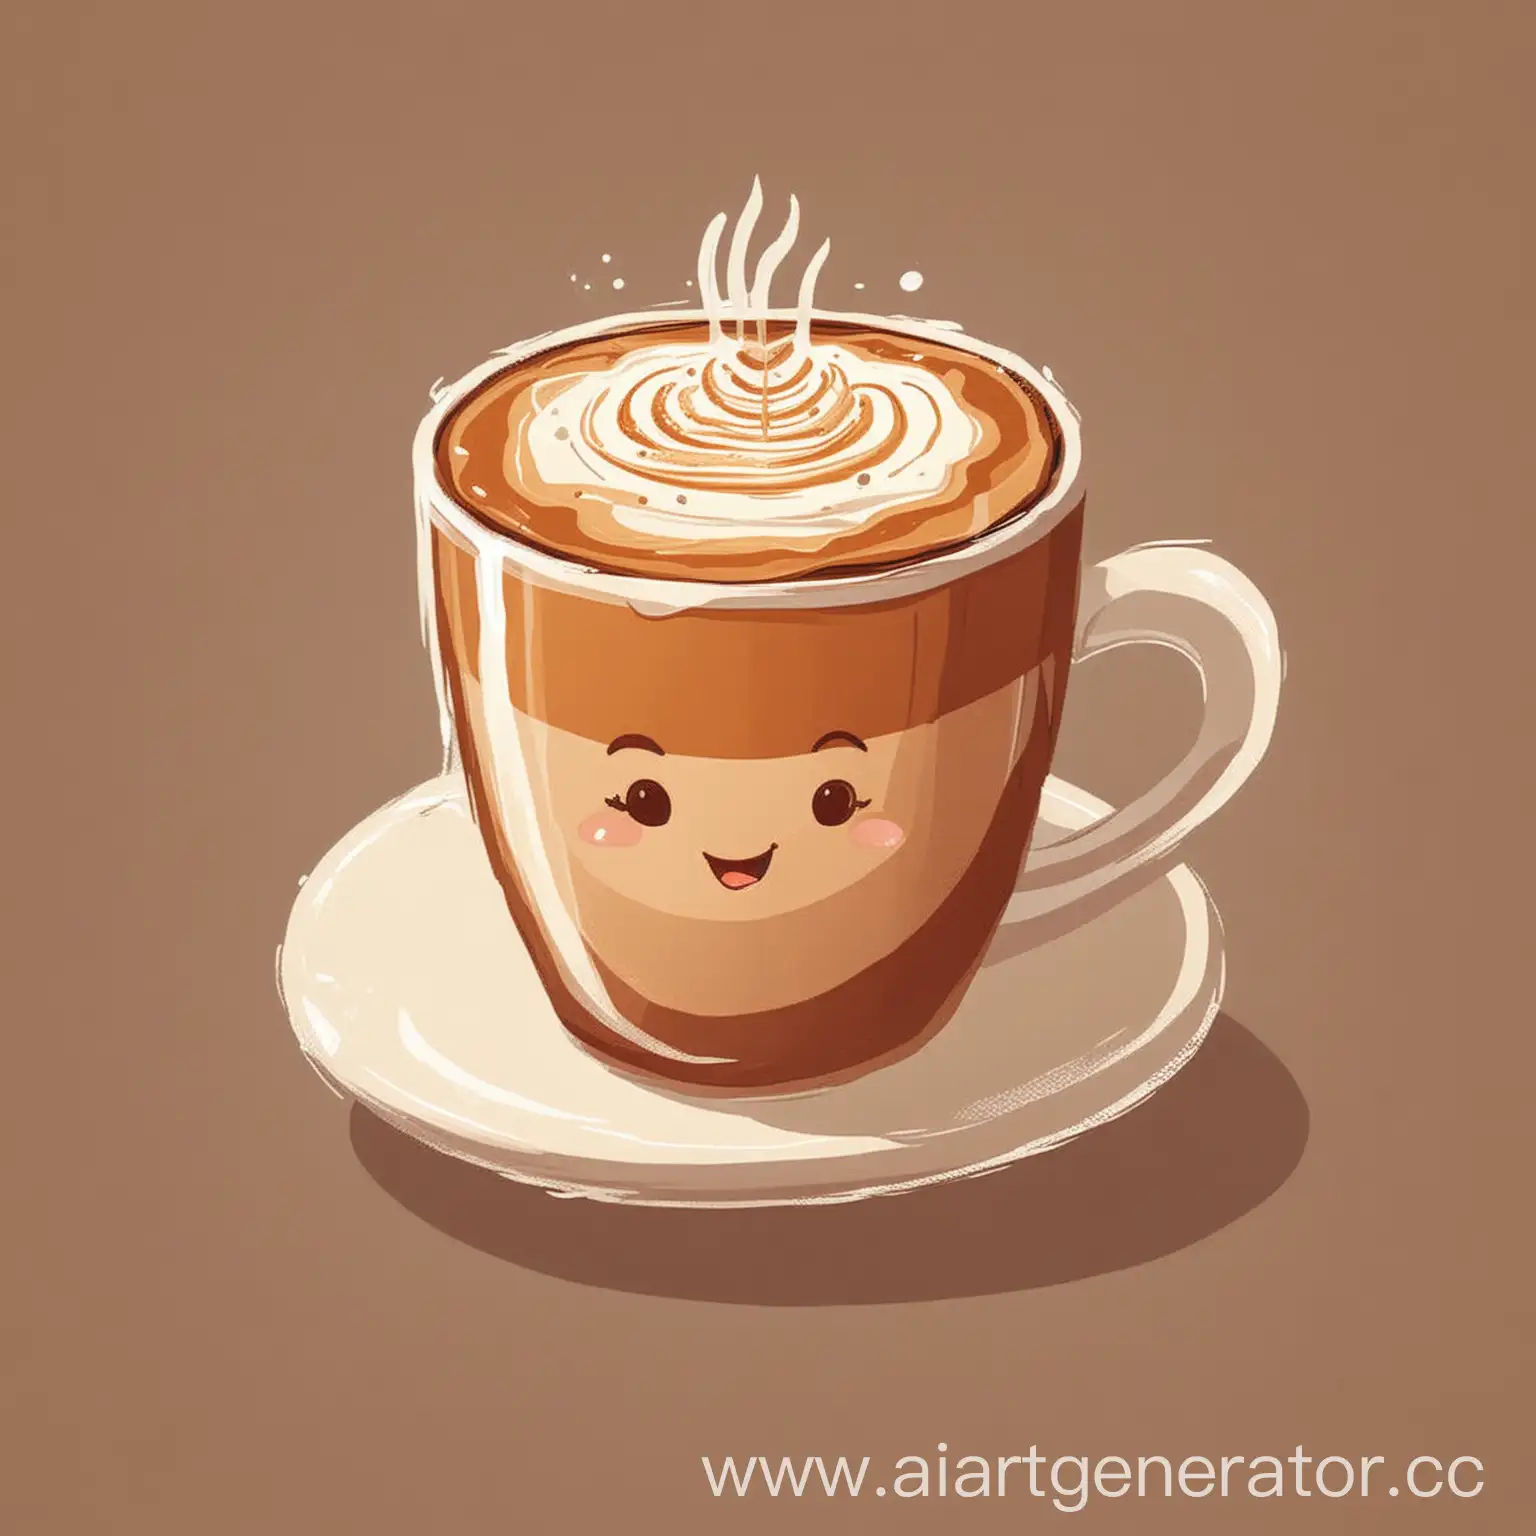 Cartoon-Style-Cup-of-Coffee-with-Latte-Print